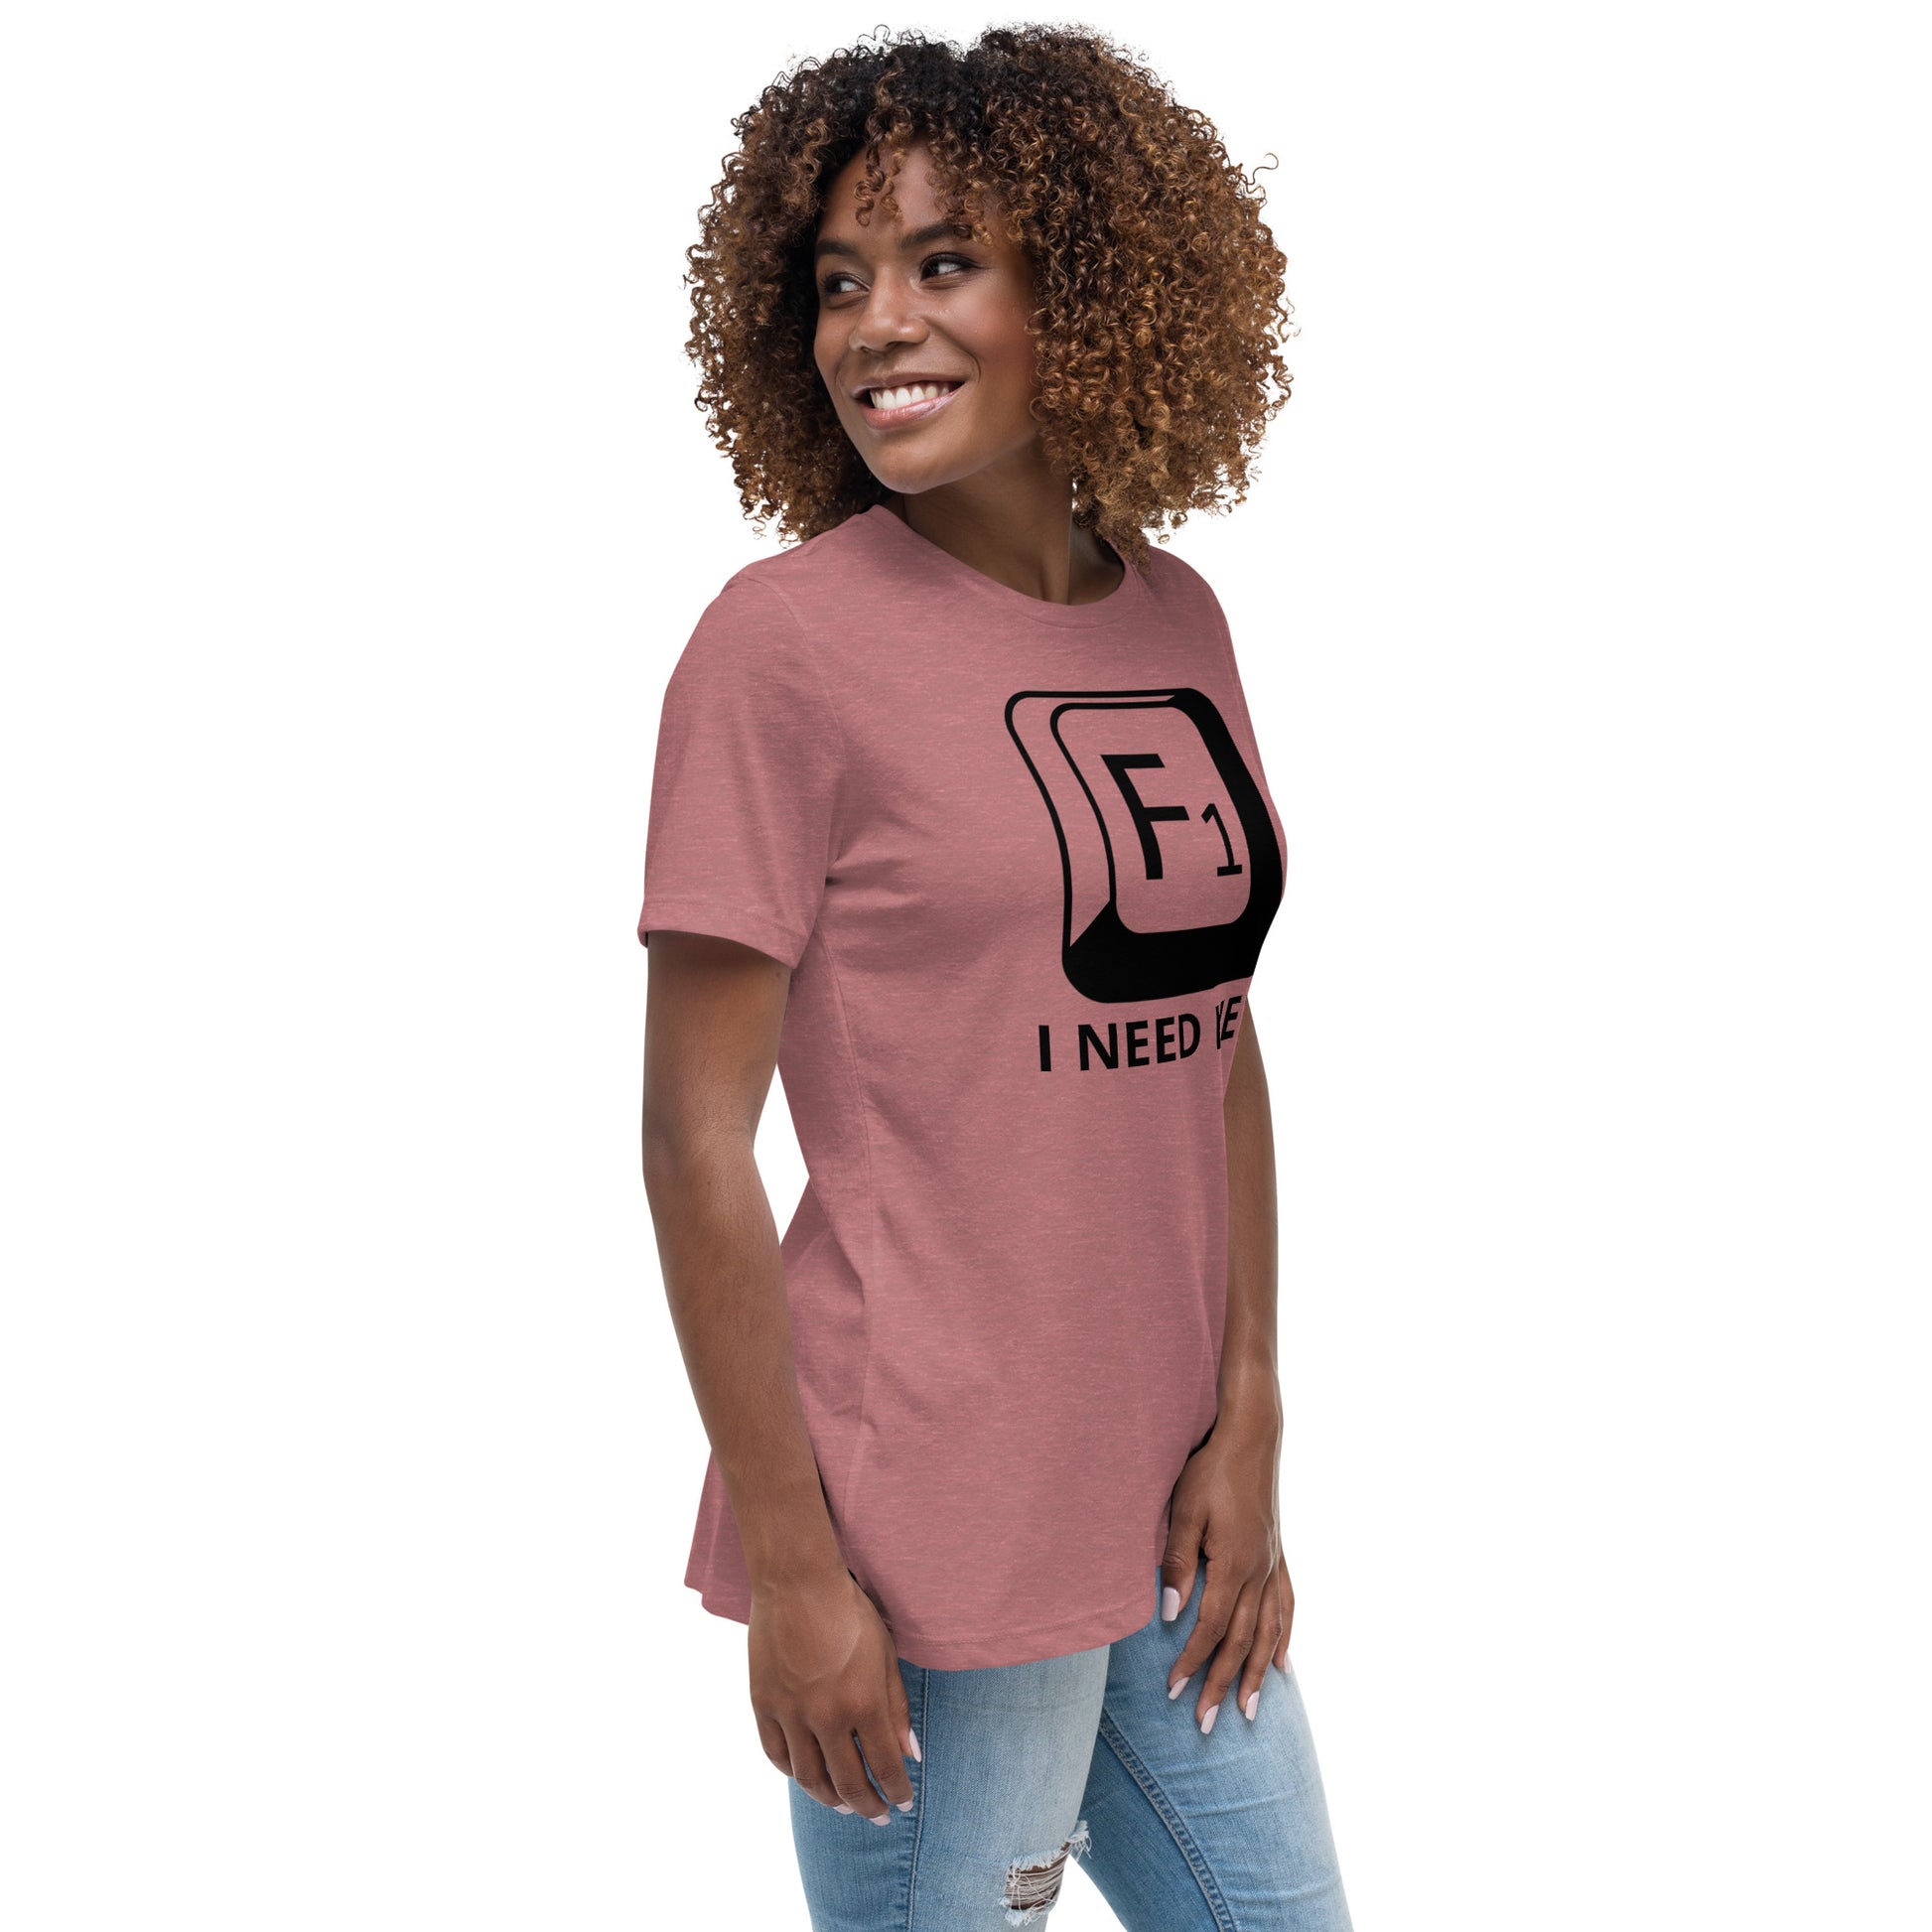 Woman with mauve t-shirt with picture of "F1" key and text "I need help"